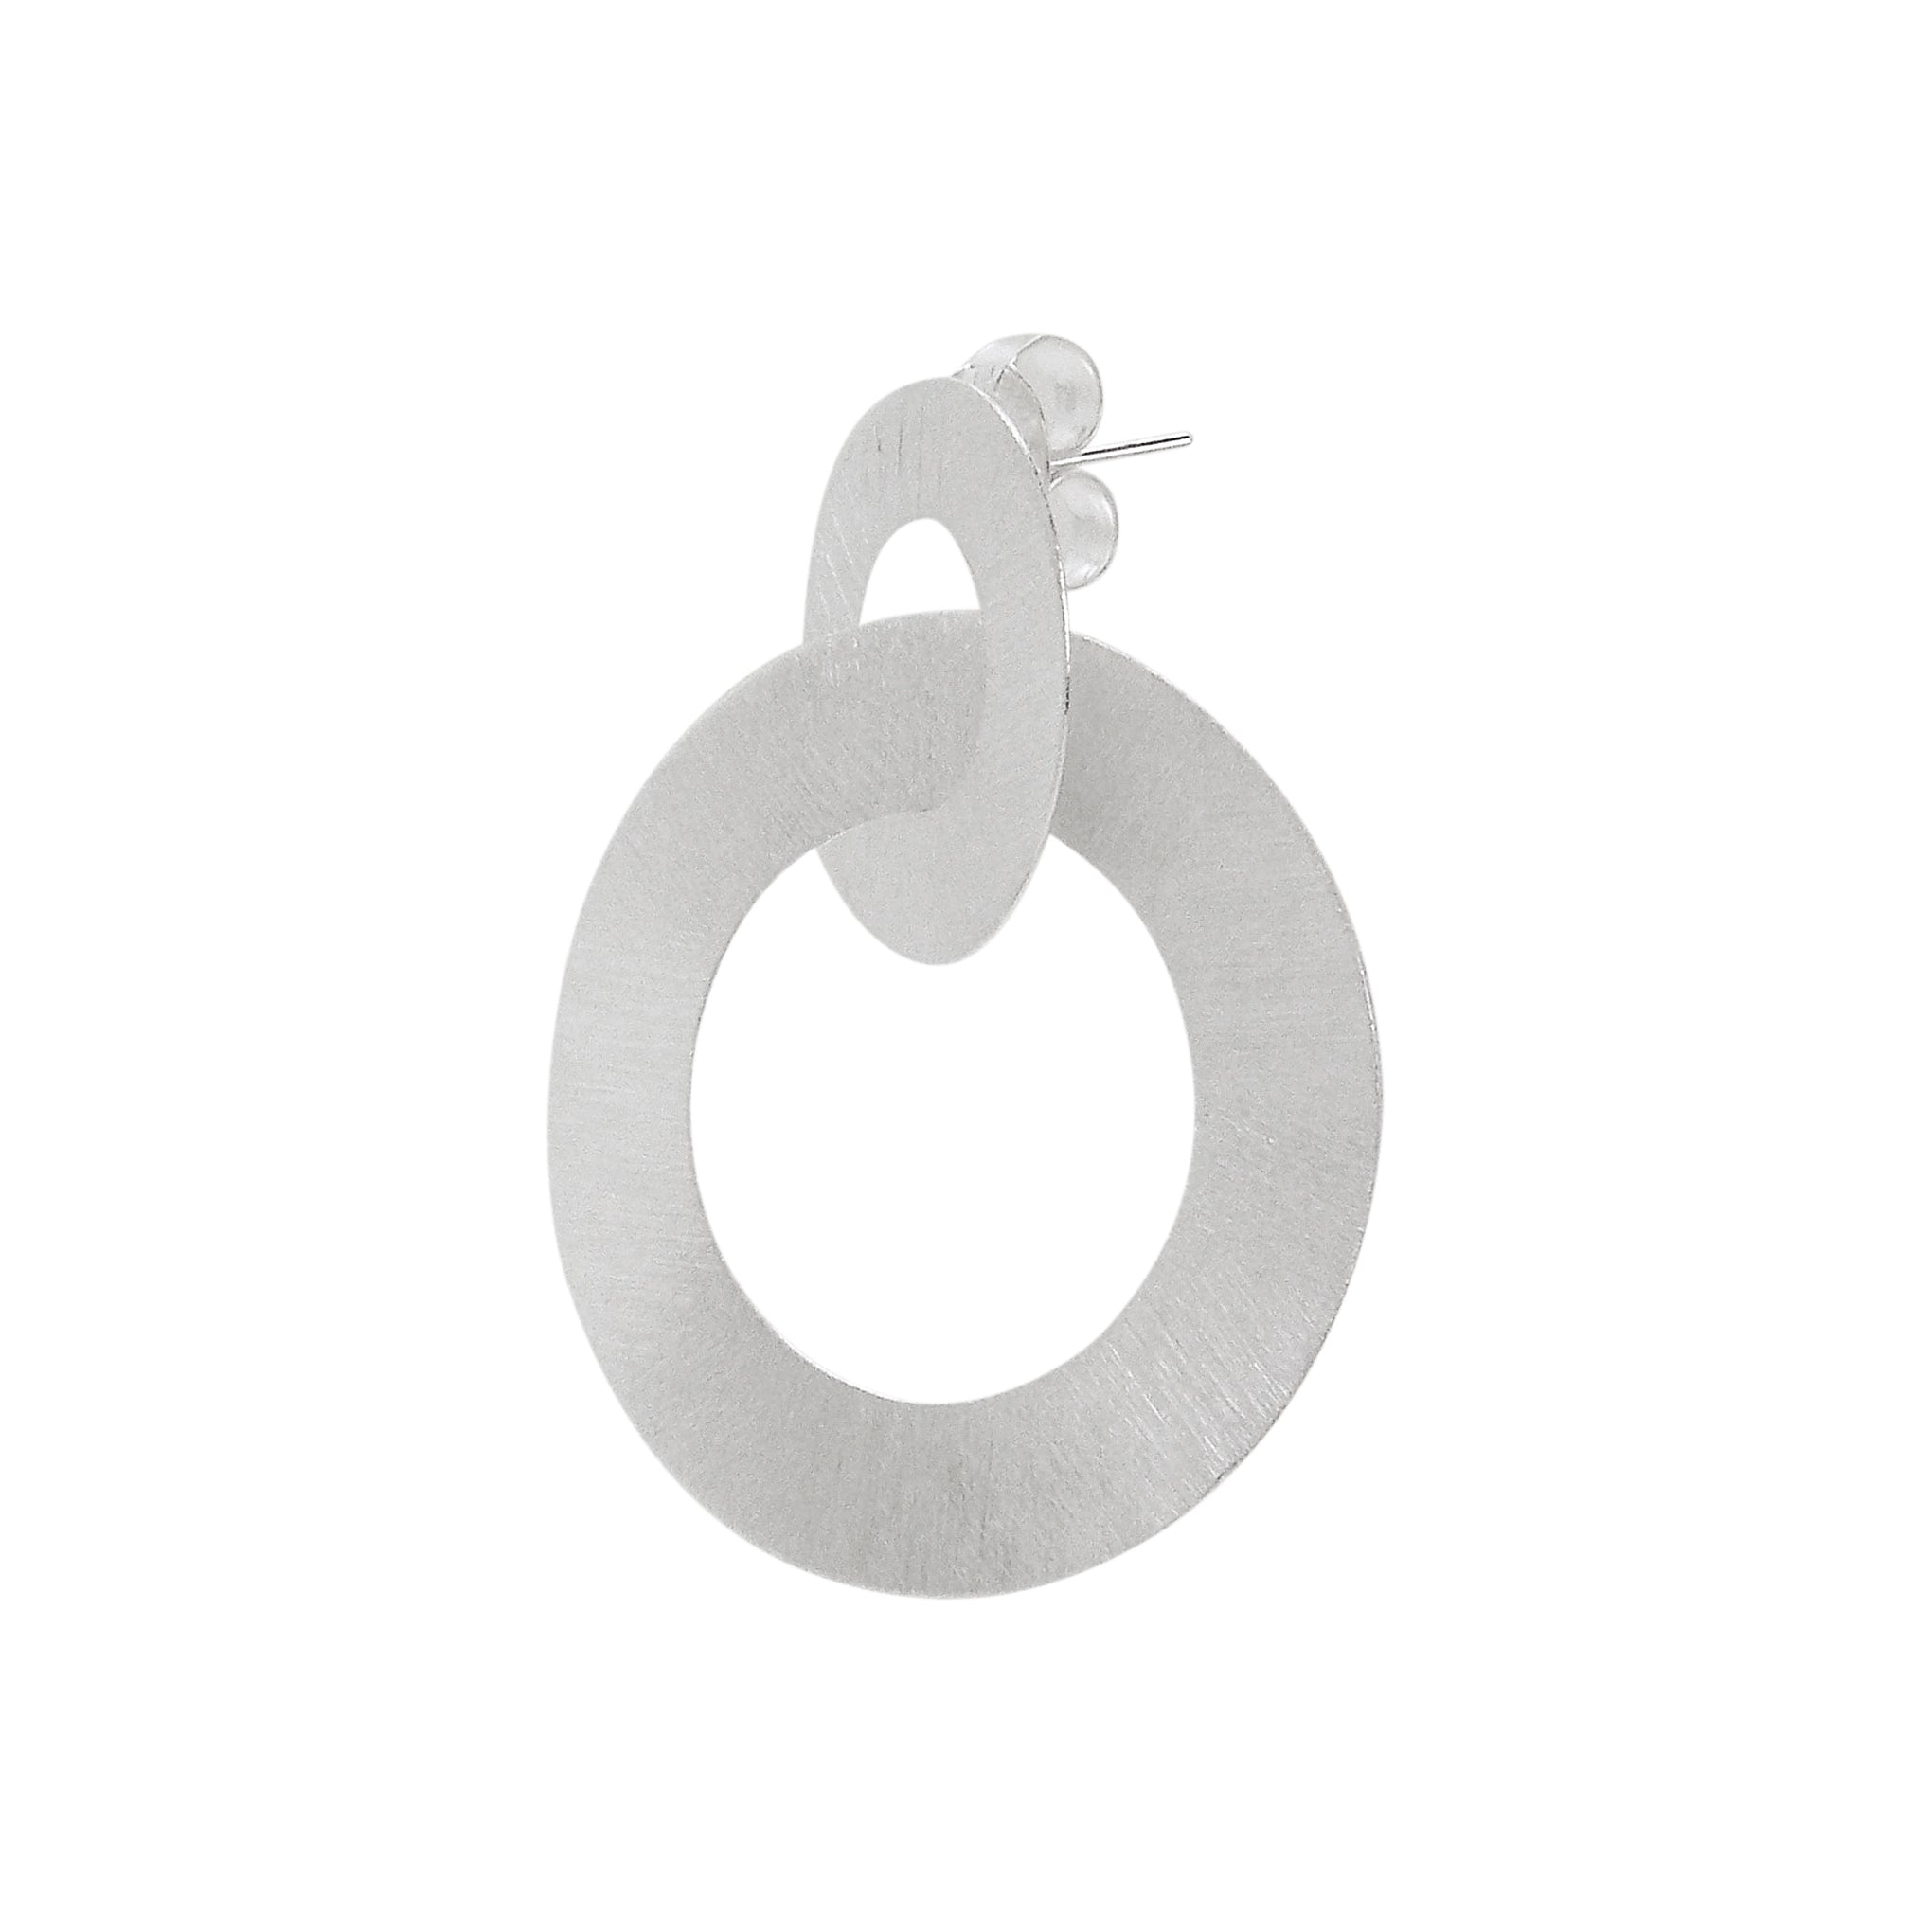 45 Degree Angle View of Sheila Fajl Anna Double Hoop Circle Earring in Brushed Sterling Silver Plated